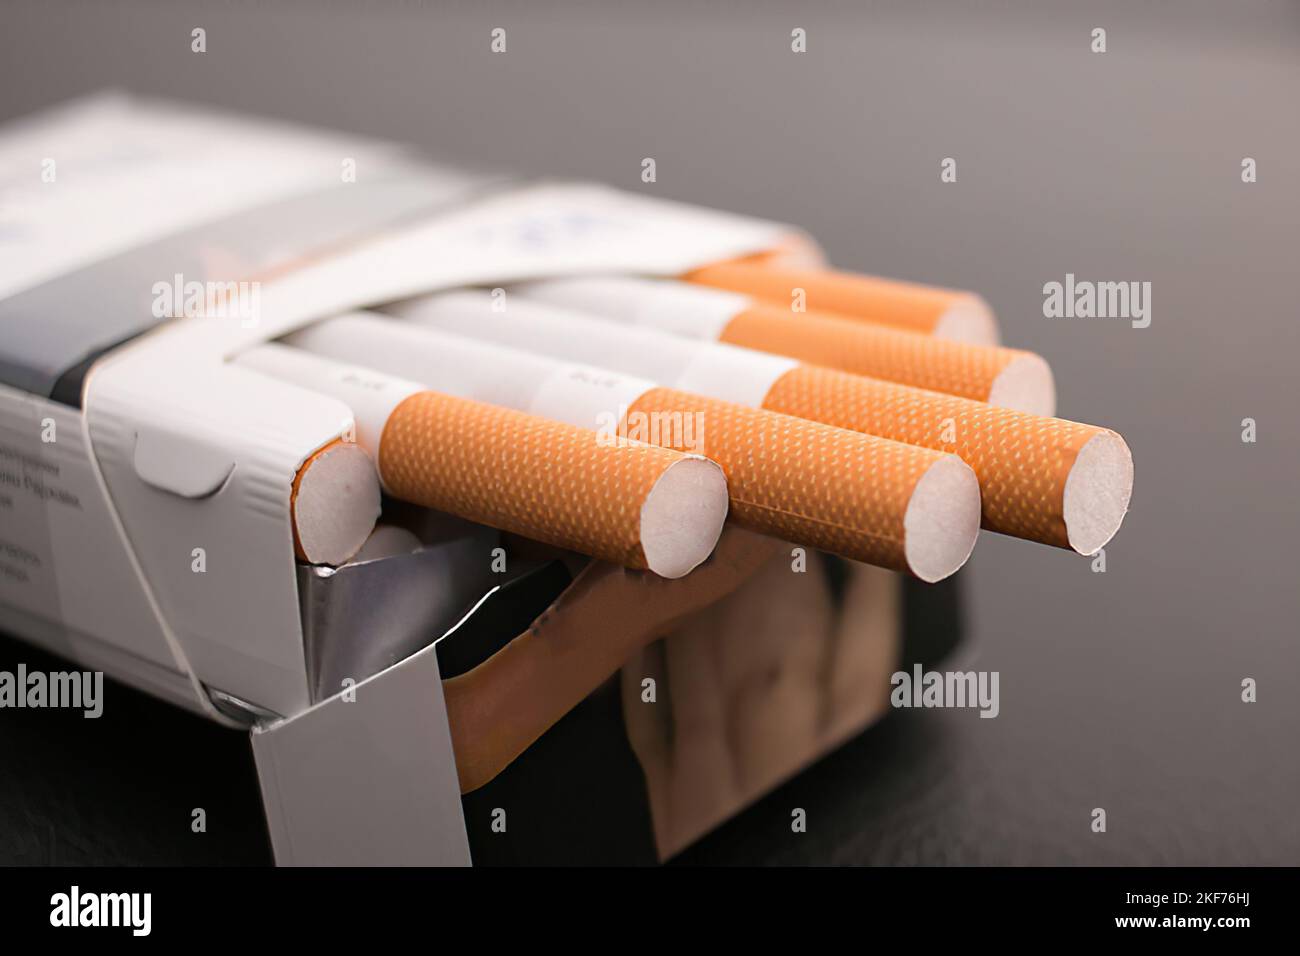 Cigarettes in a pack, close up Stock Photo